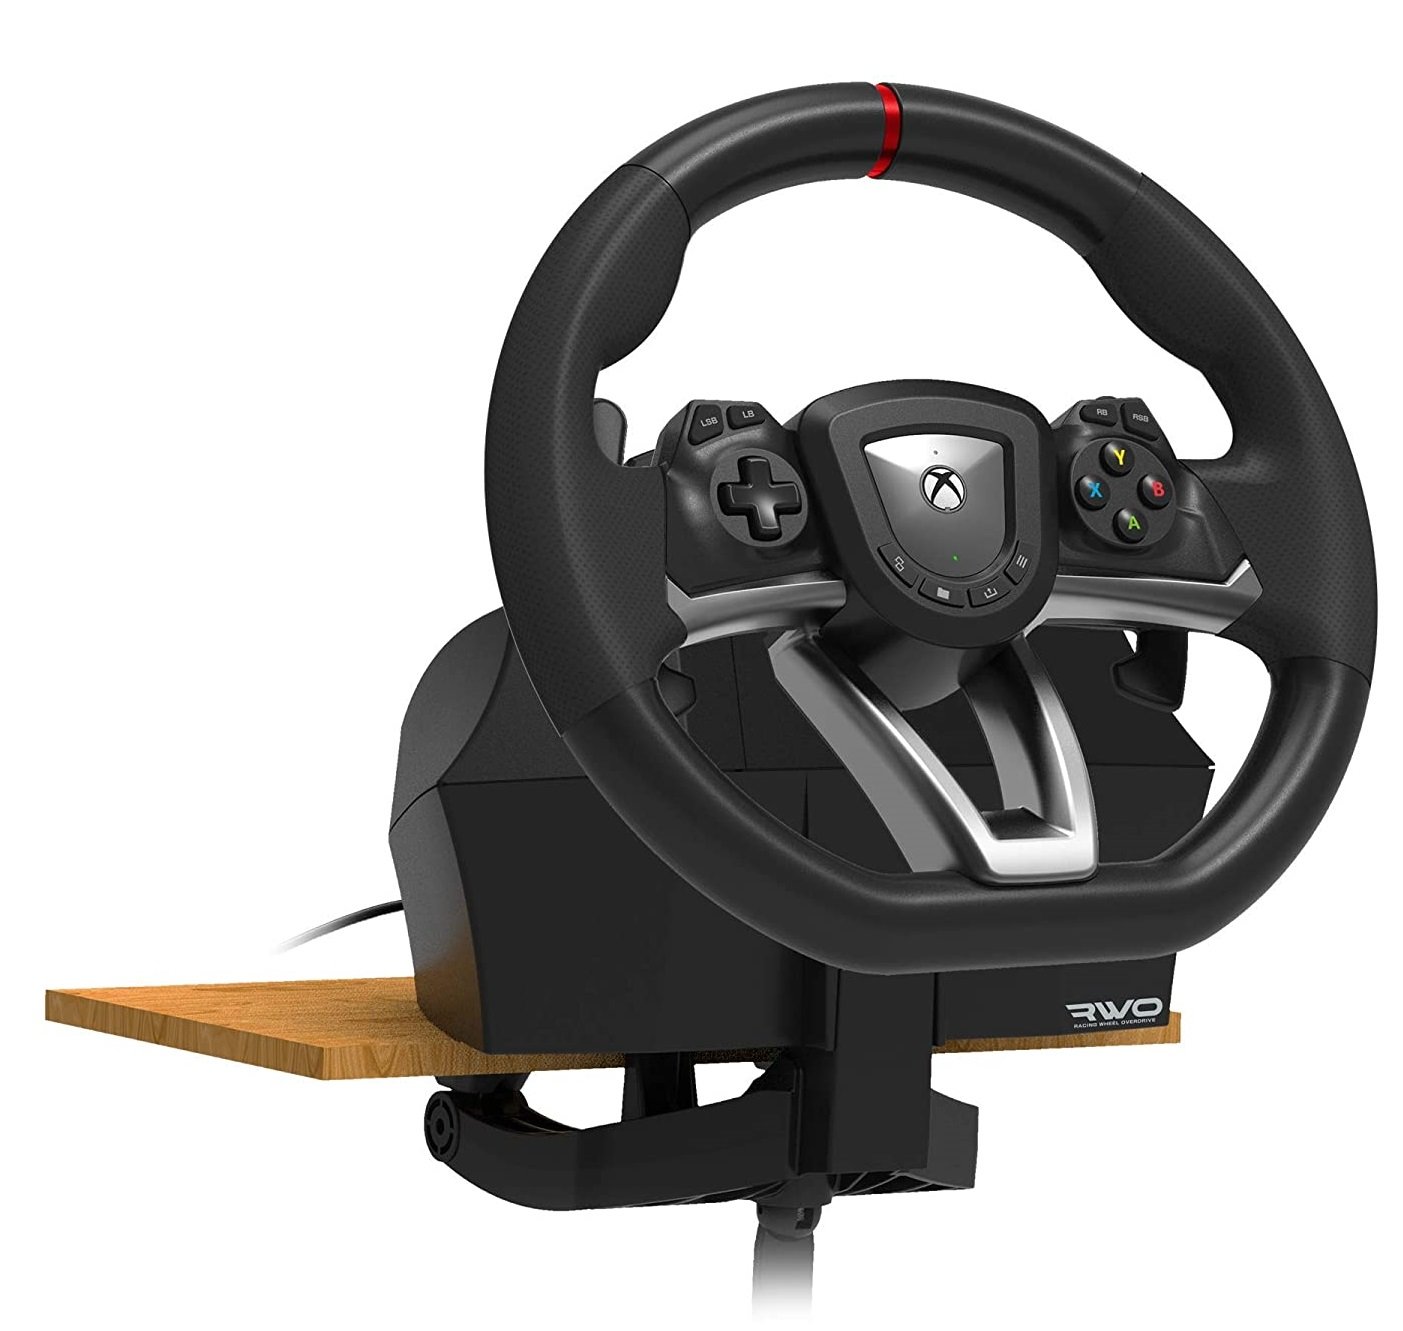 Costume Best Racing Simulator Setup For Xbox Series X with Dual Monitor